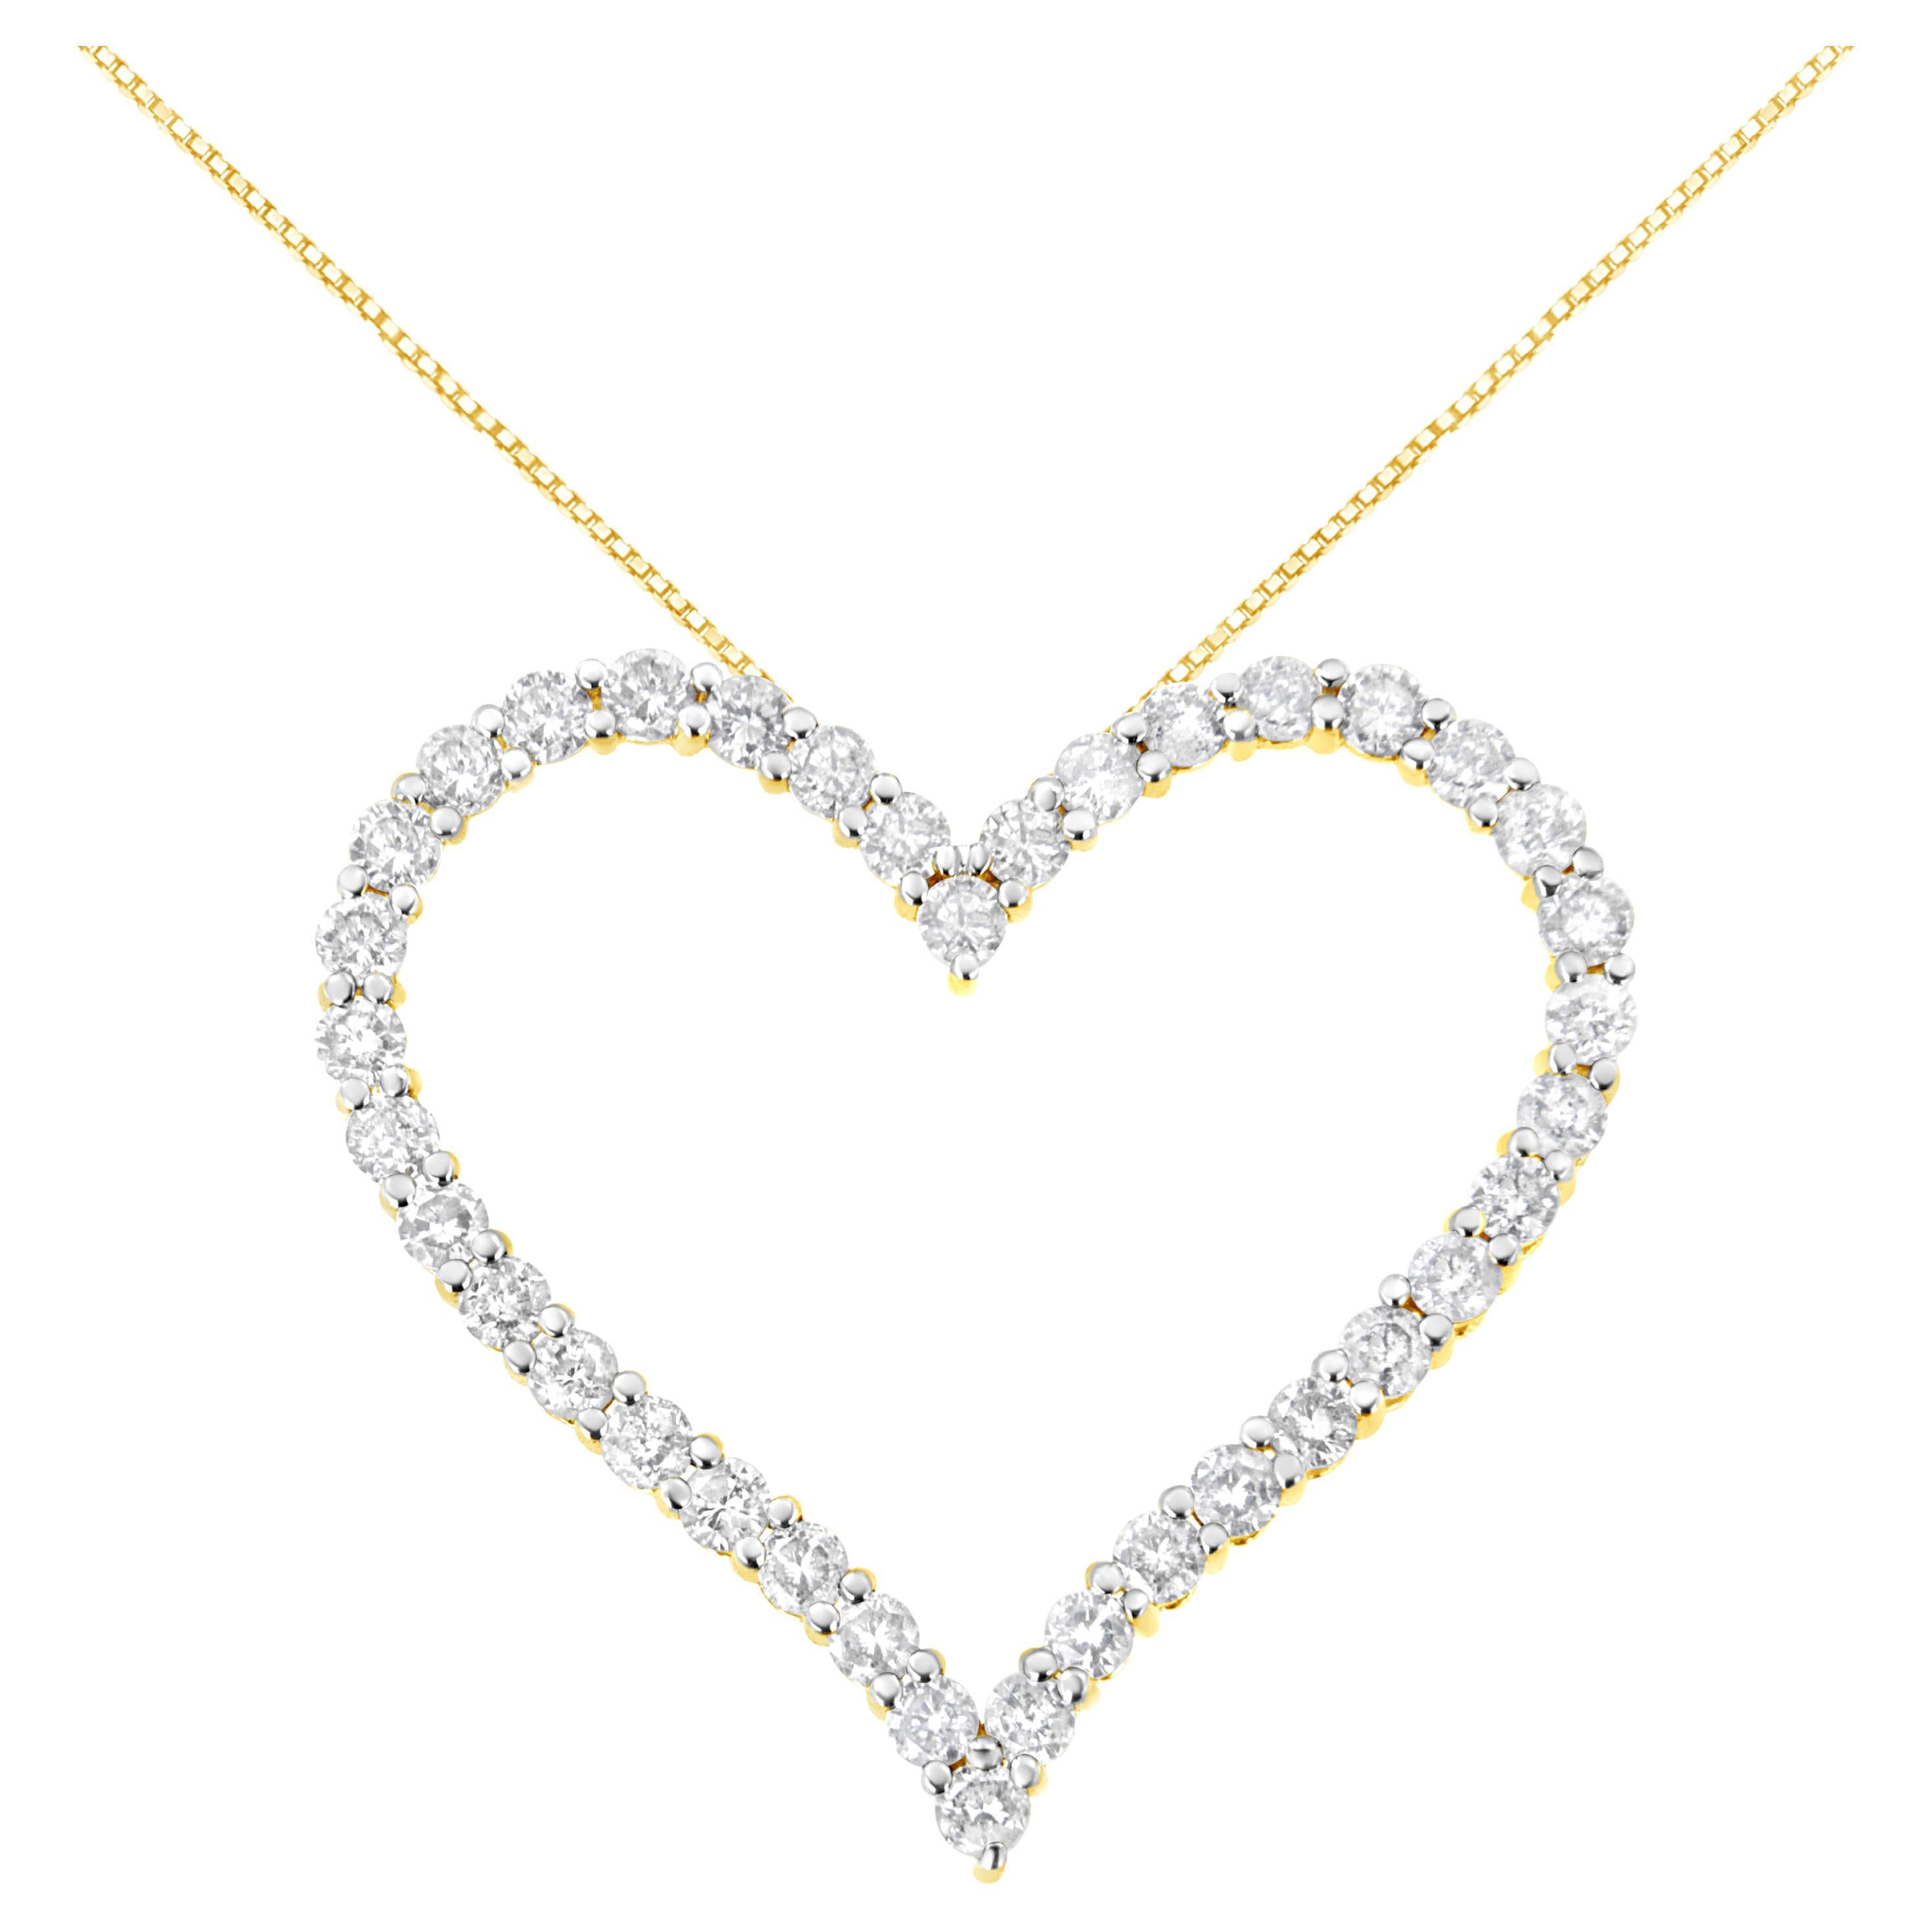 Yellow Gold Plated Sterling Silver 3.0 Carat Diamond Open Heart Pendant Necklace